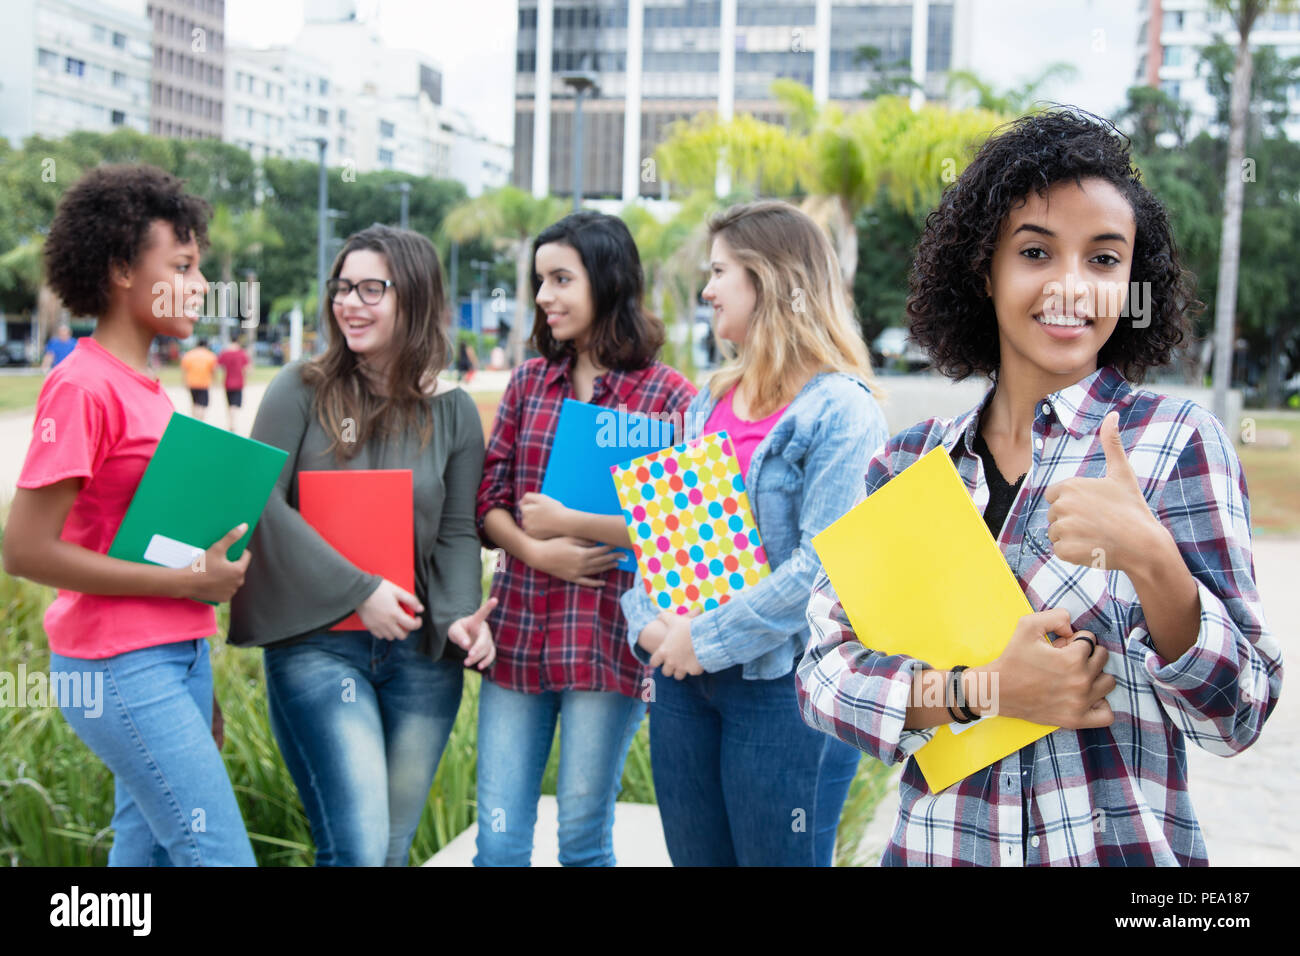 Successful latin american female student with group of international students outdoors on campus of university Stock Photo